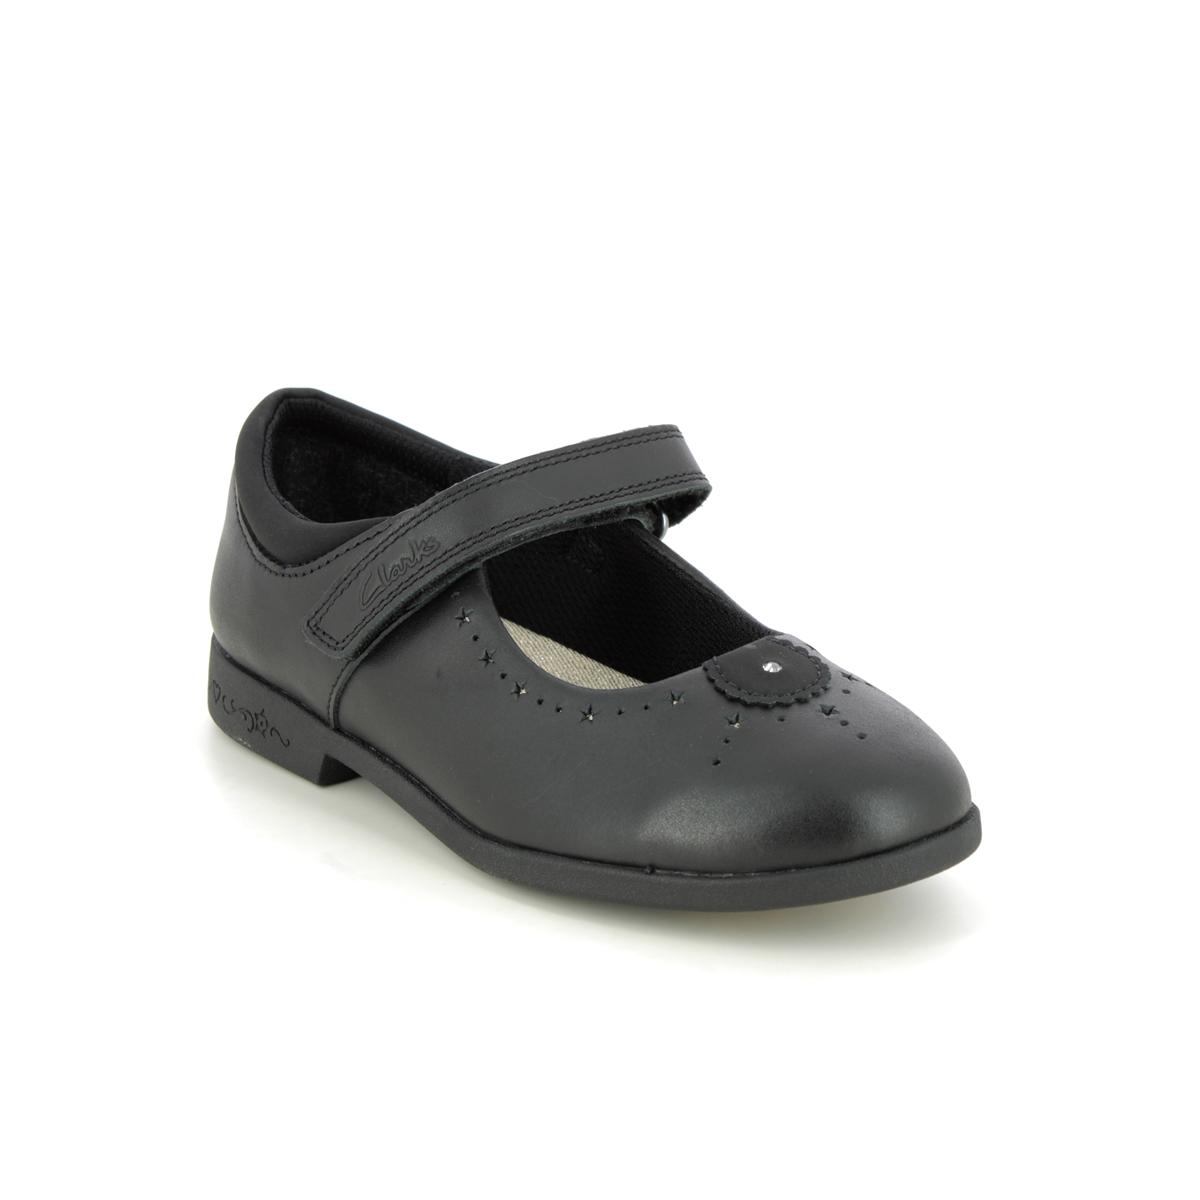 Clarks Magic Step Mj K Black leather Kids girls school shoes 6970-86F in a Plain Leather in Size 9